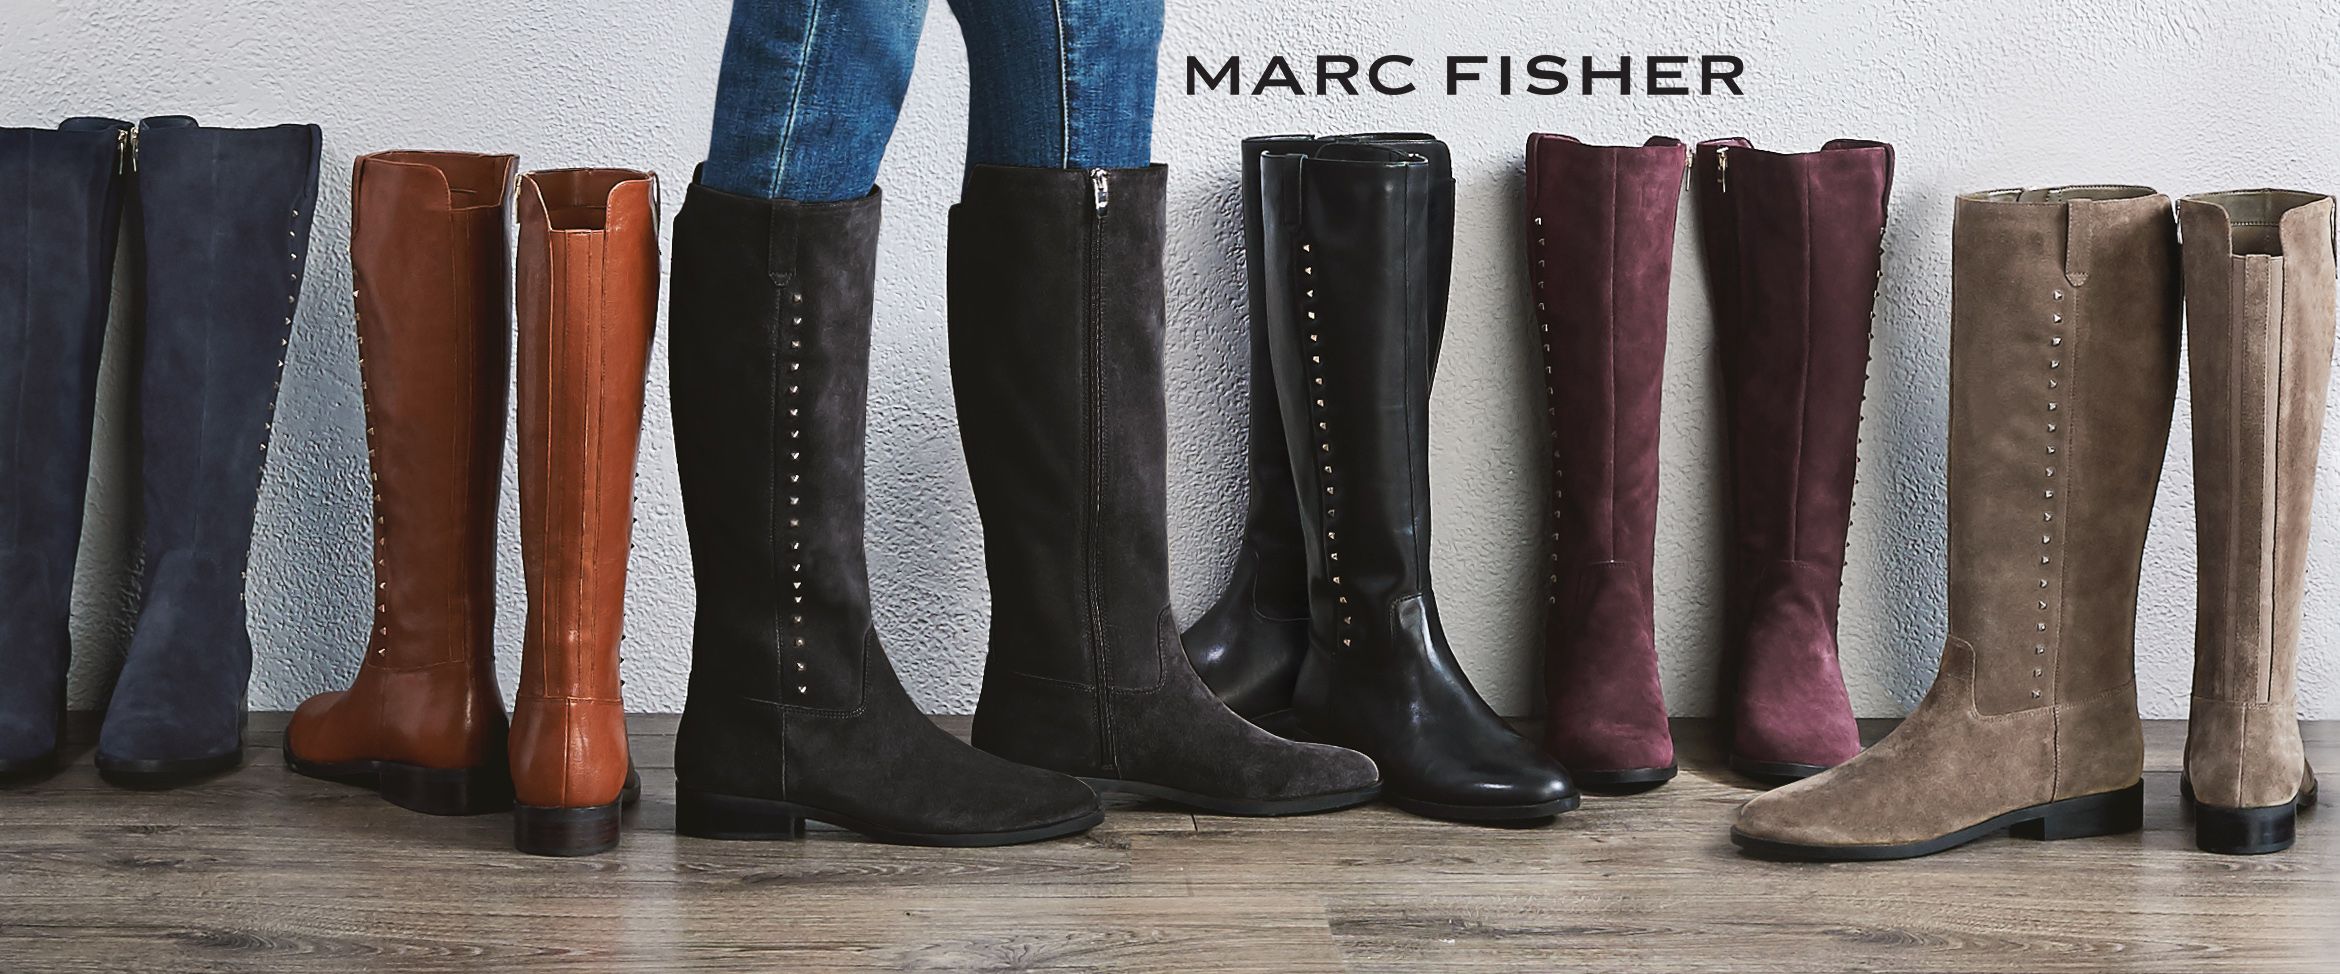 marc fisher boots qvc